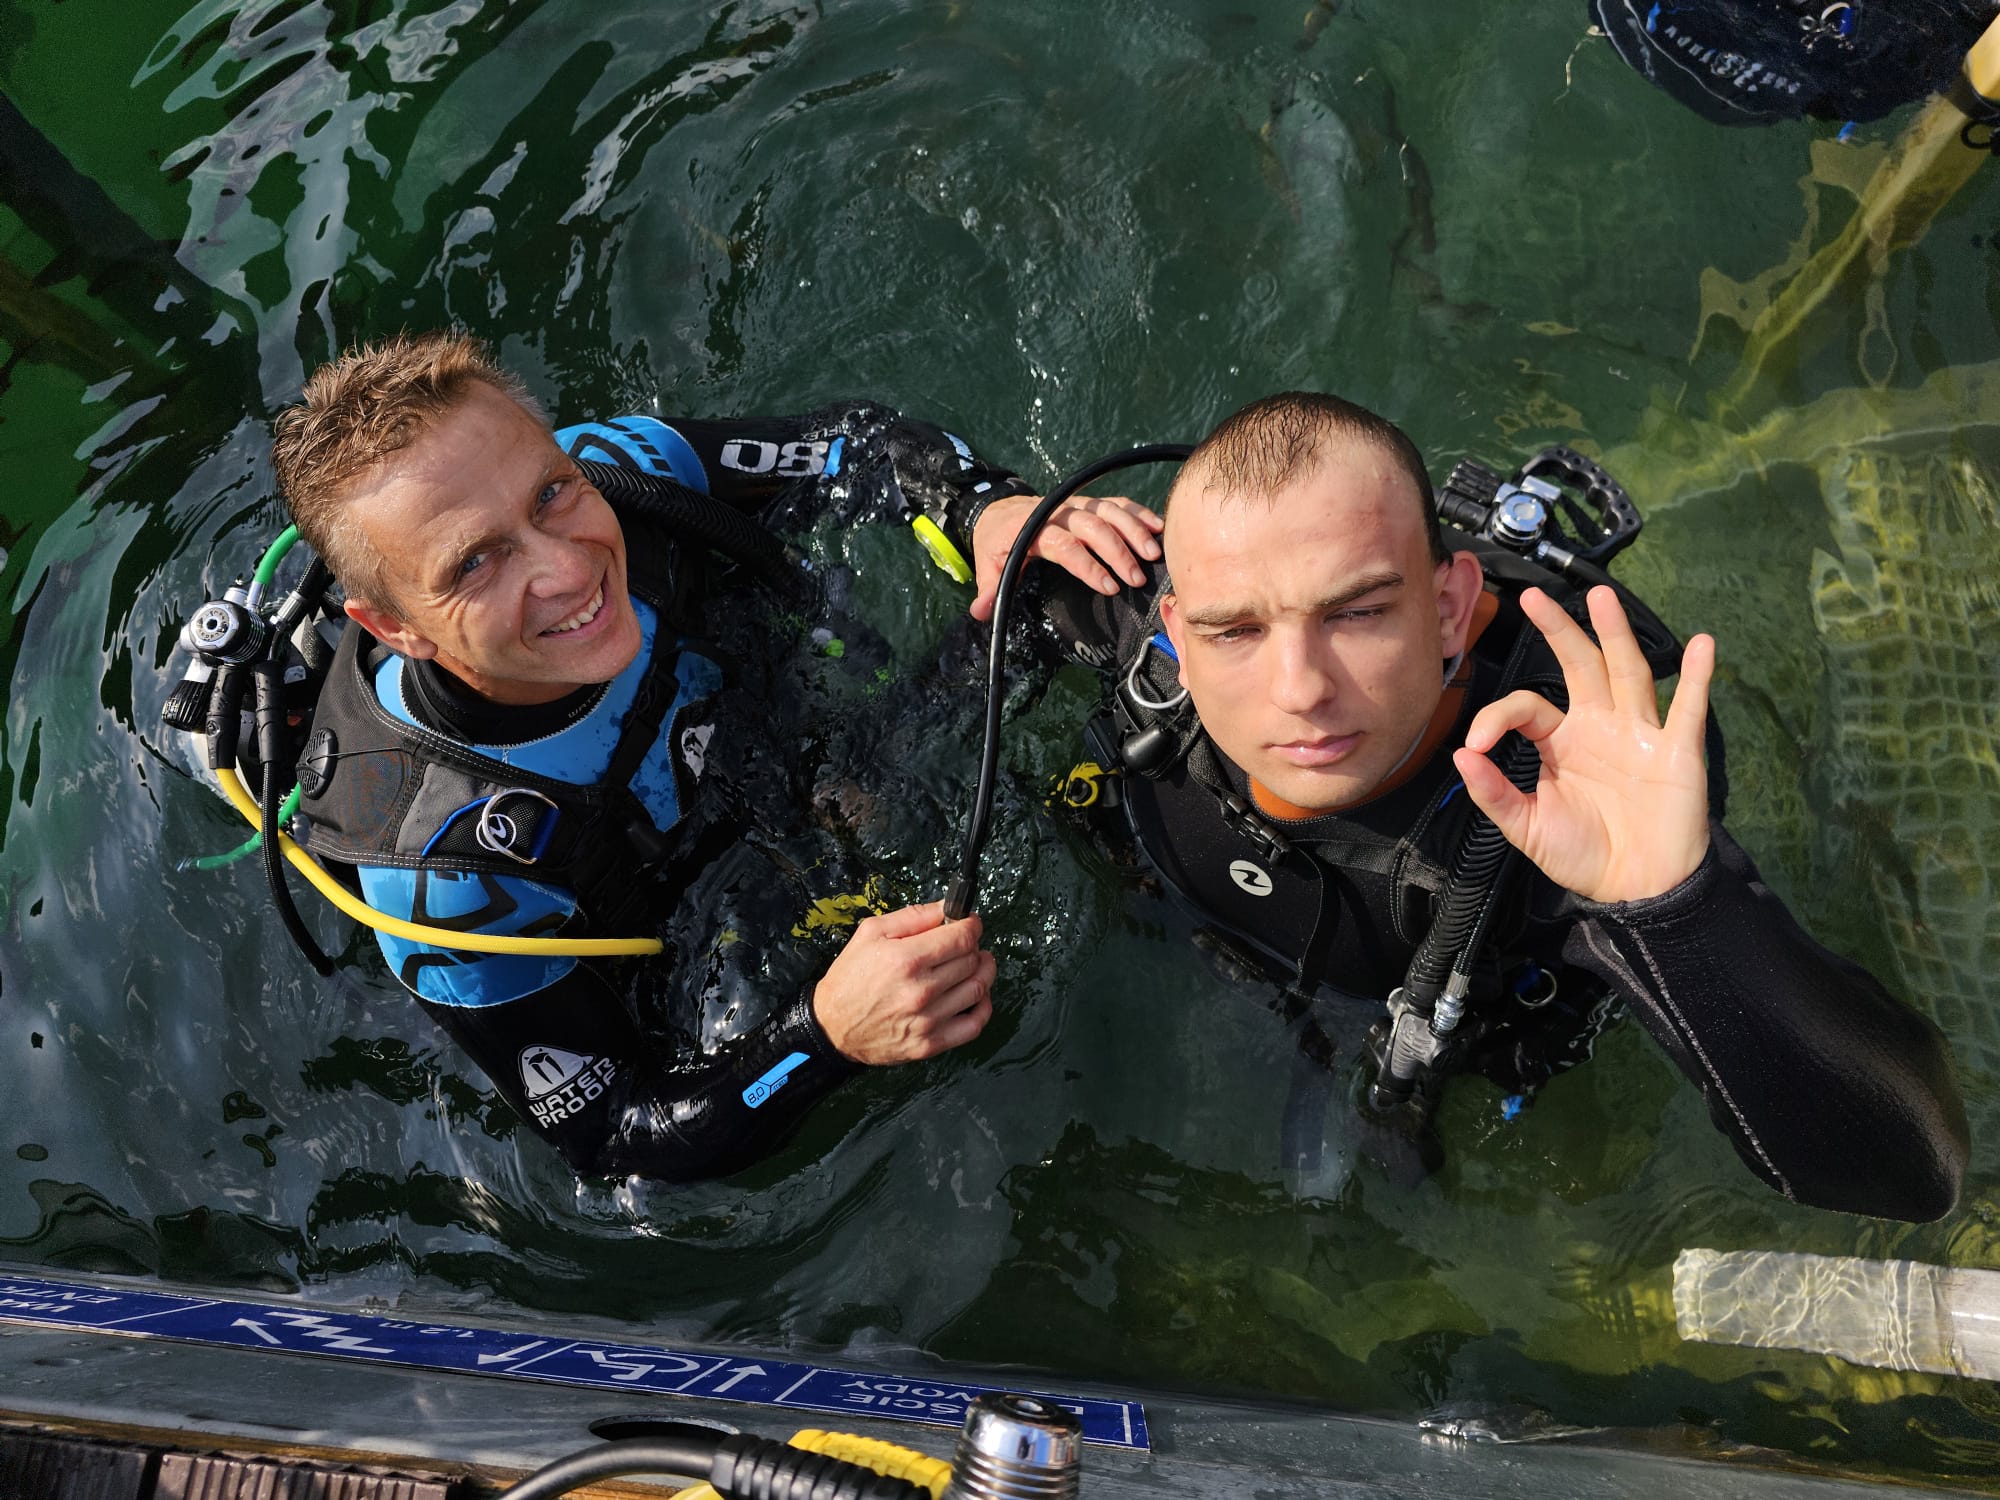 Diving course for people with disabilities (photo: K. Trawiński)